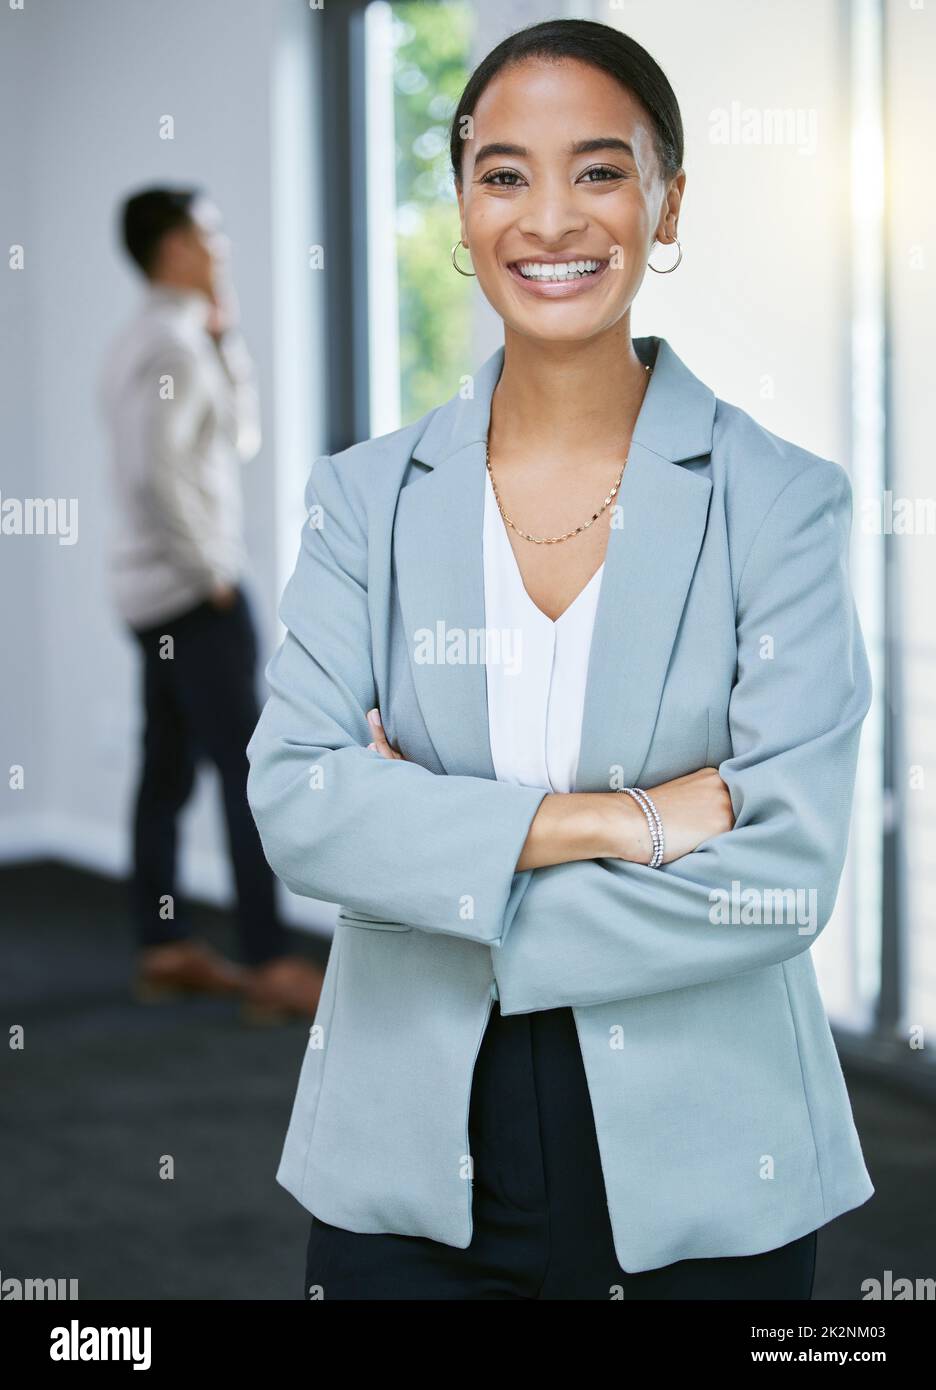 I aim to meet you every real estate need. Shot of a young businesswoman standing in a house with her arms crossed. Stock Photo